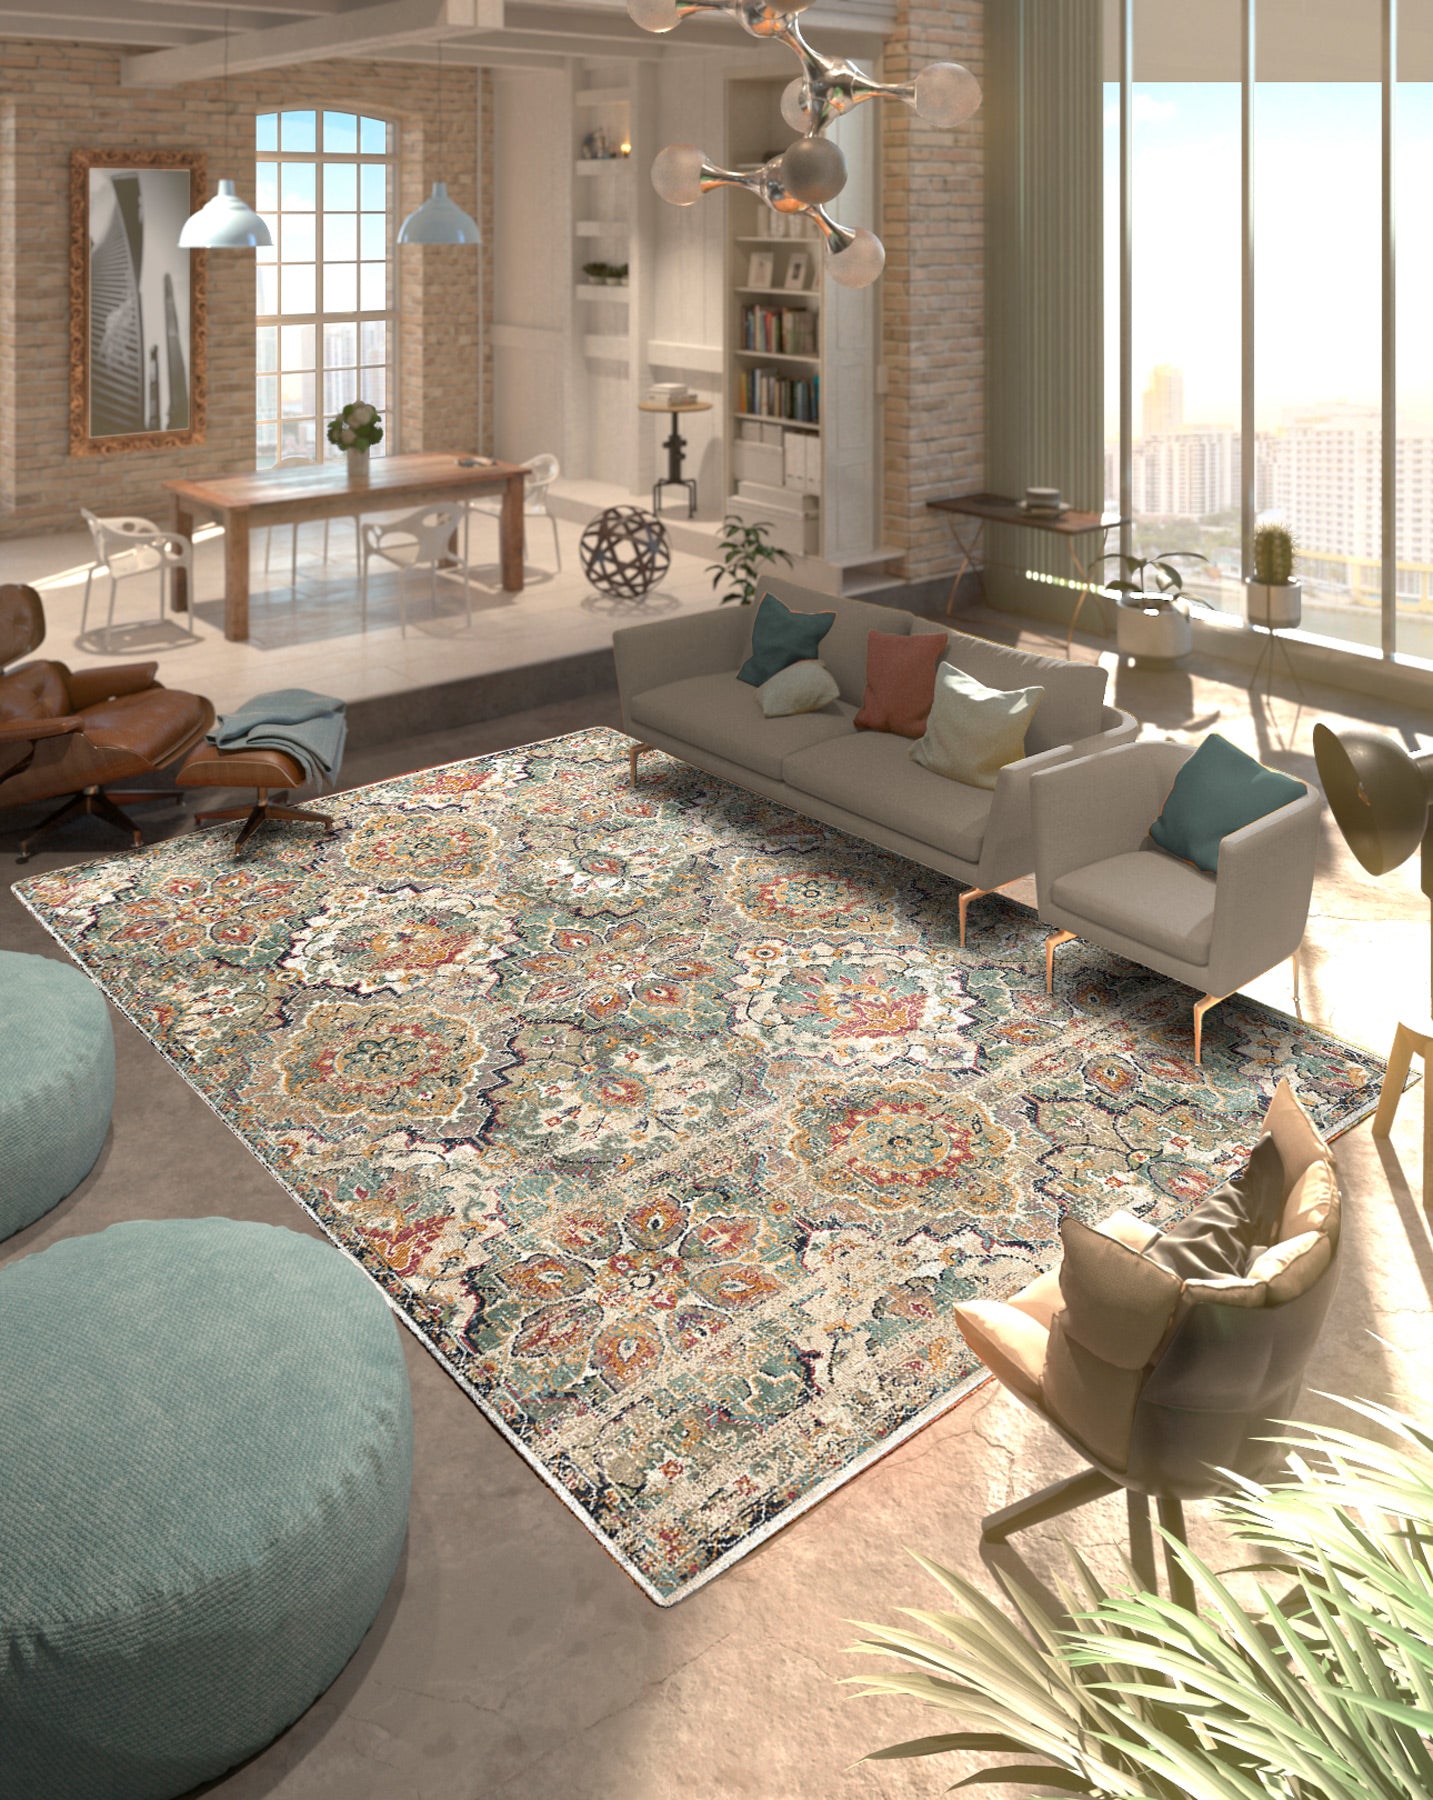 Hand-Knotted Rugs or Machine Made Rugs … What’s the Difference?